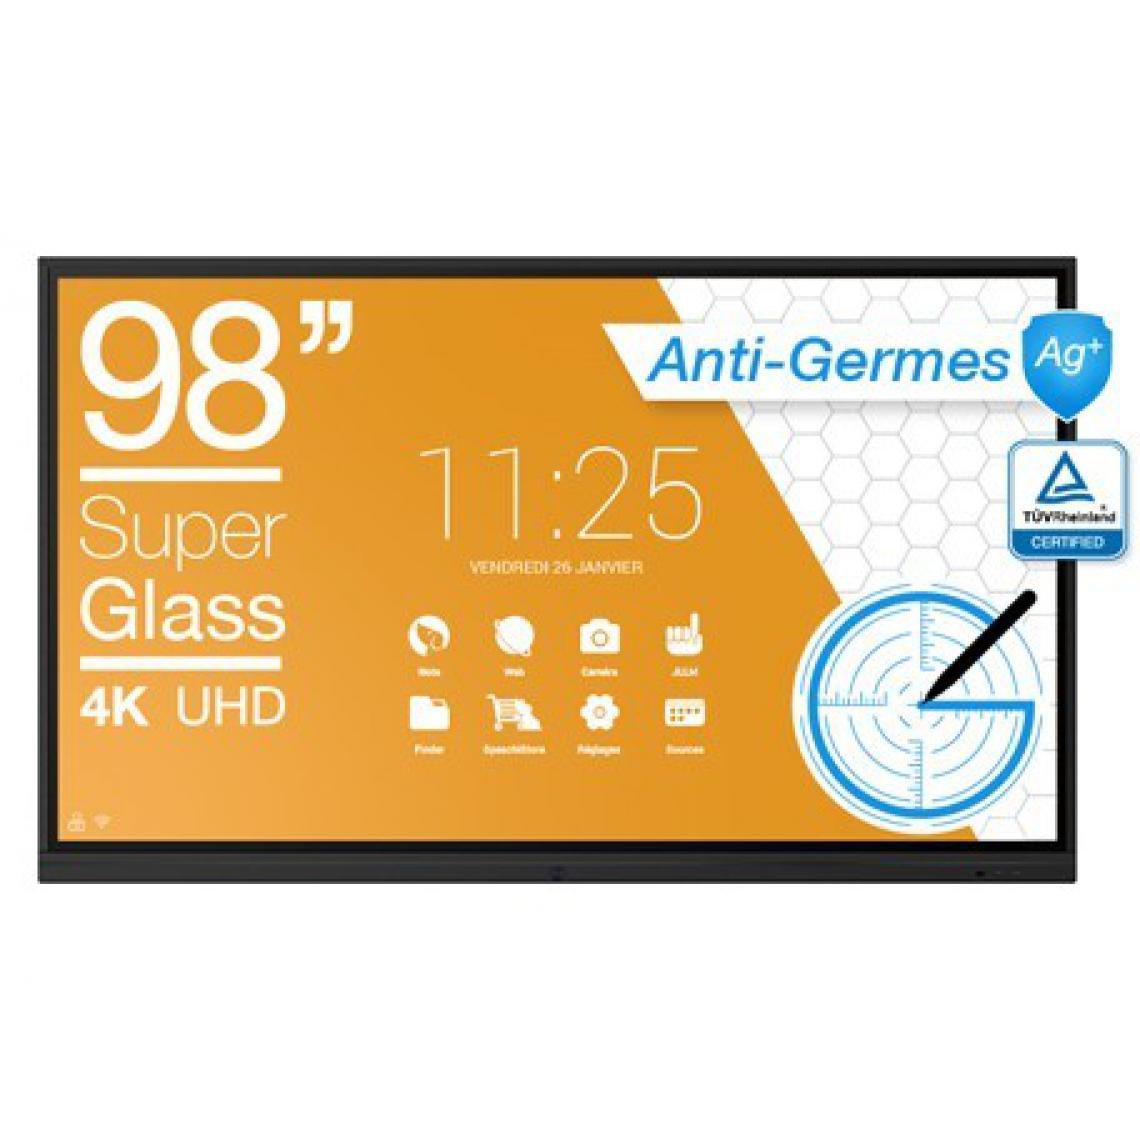 Speechi - Ecran interactif tactile Anti-Germes SuperGlass Android SpeechiTouch UHD - 98" - Tablette Android